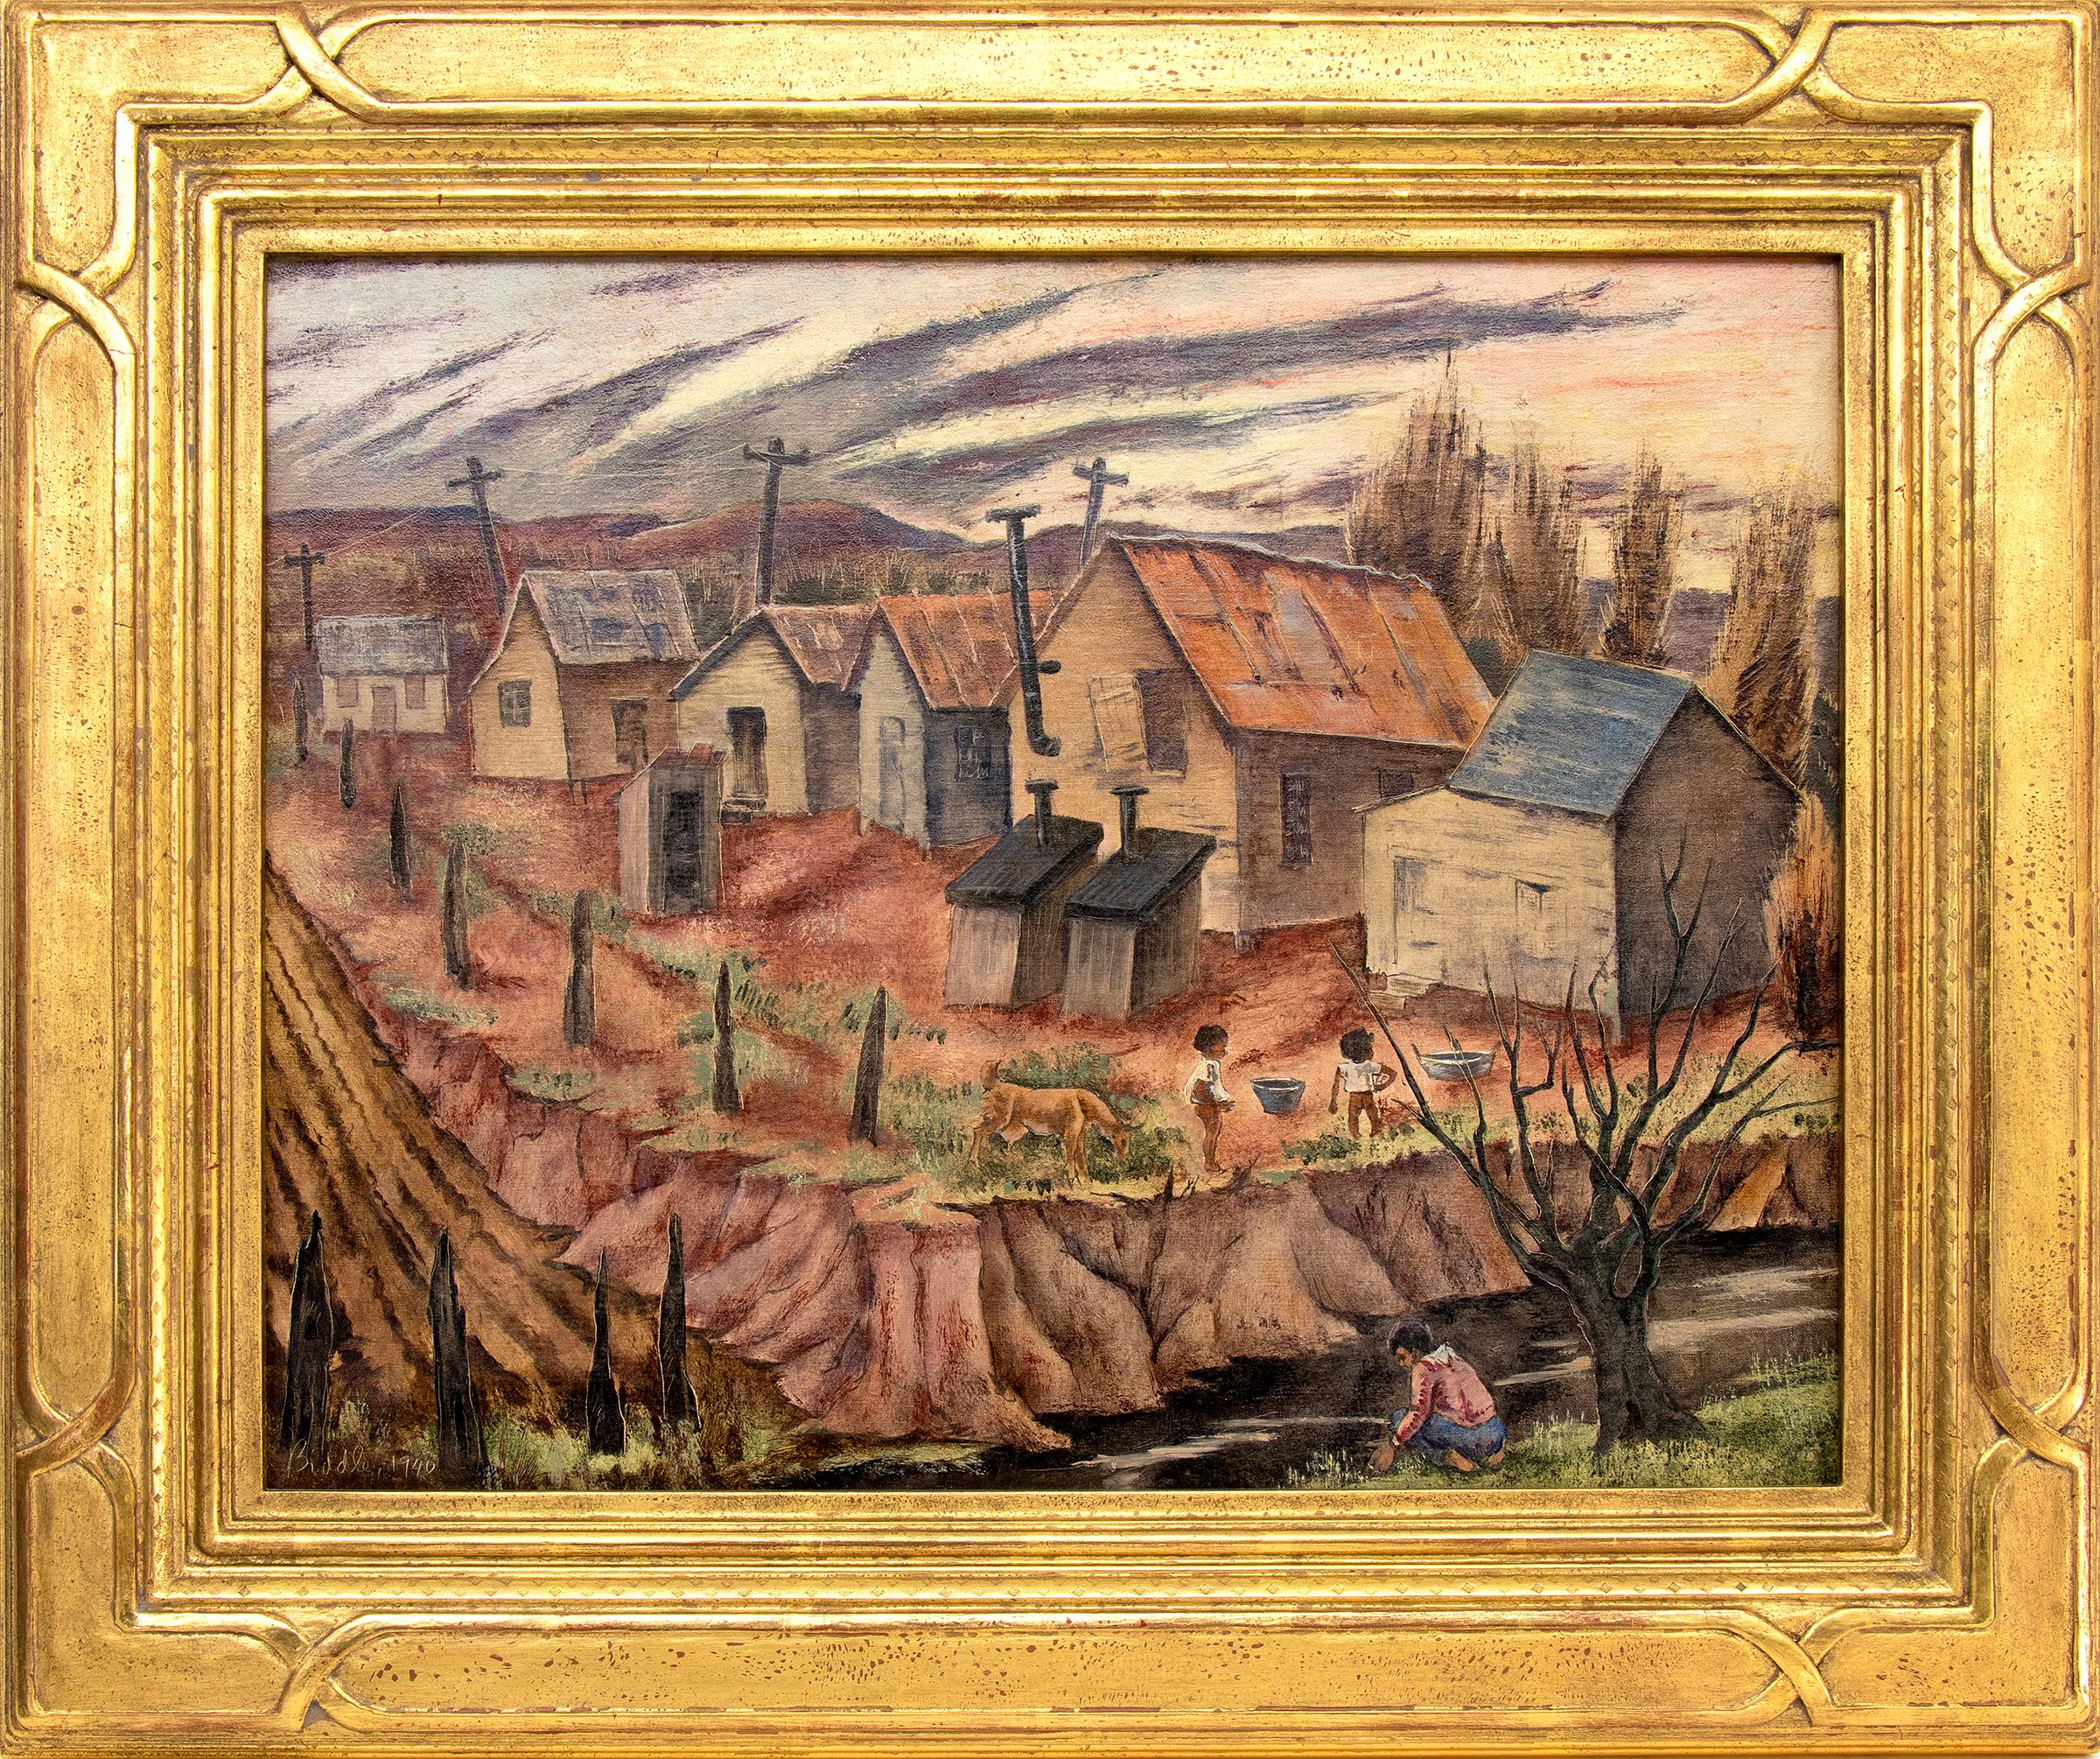 George Biddle Abstract Painting - Hooverville by Day (Colorado), 1940s Signed Oil Landscape Painting Neighborhood